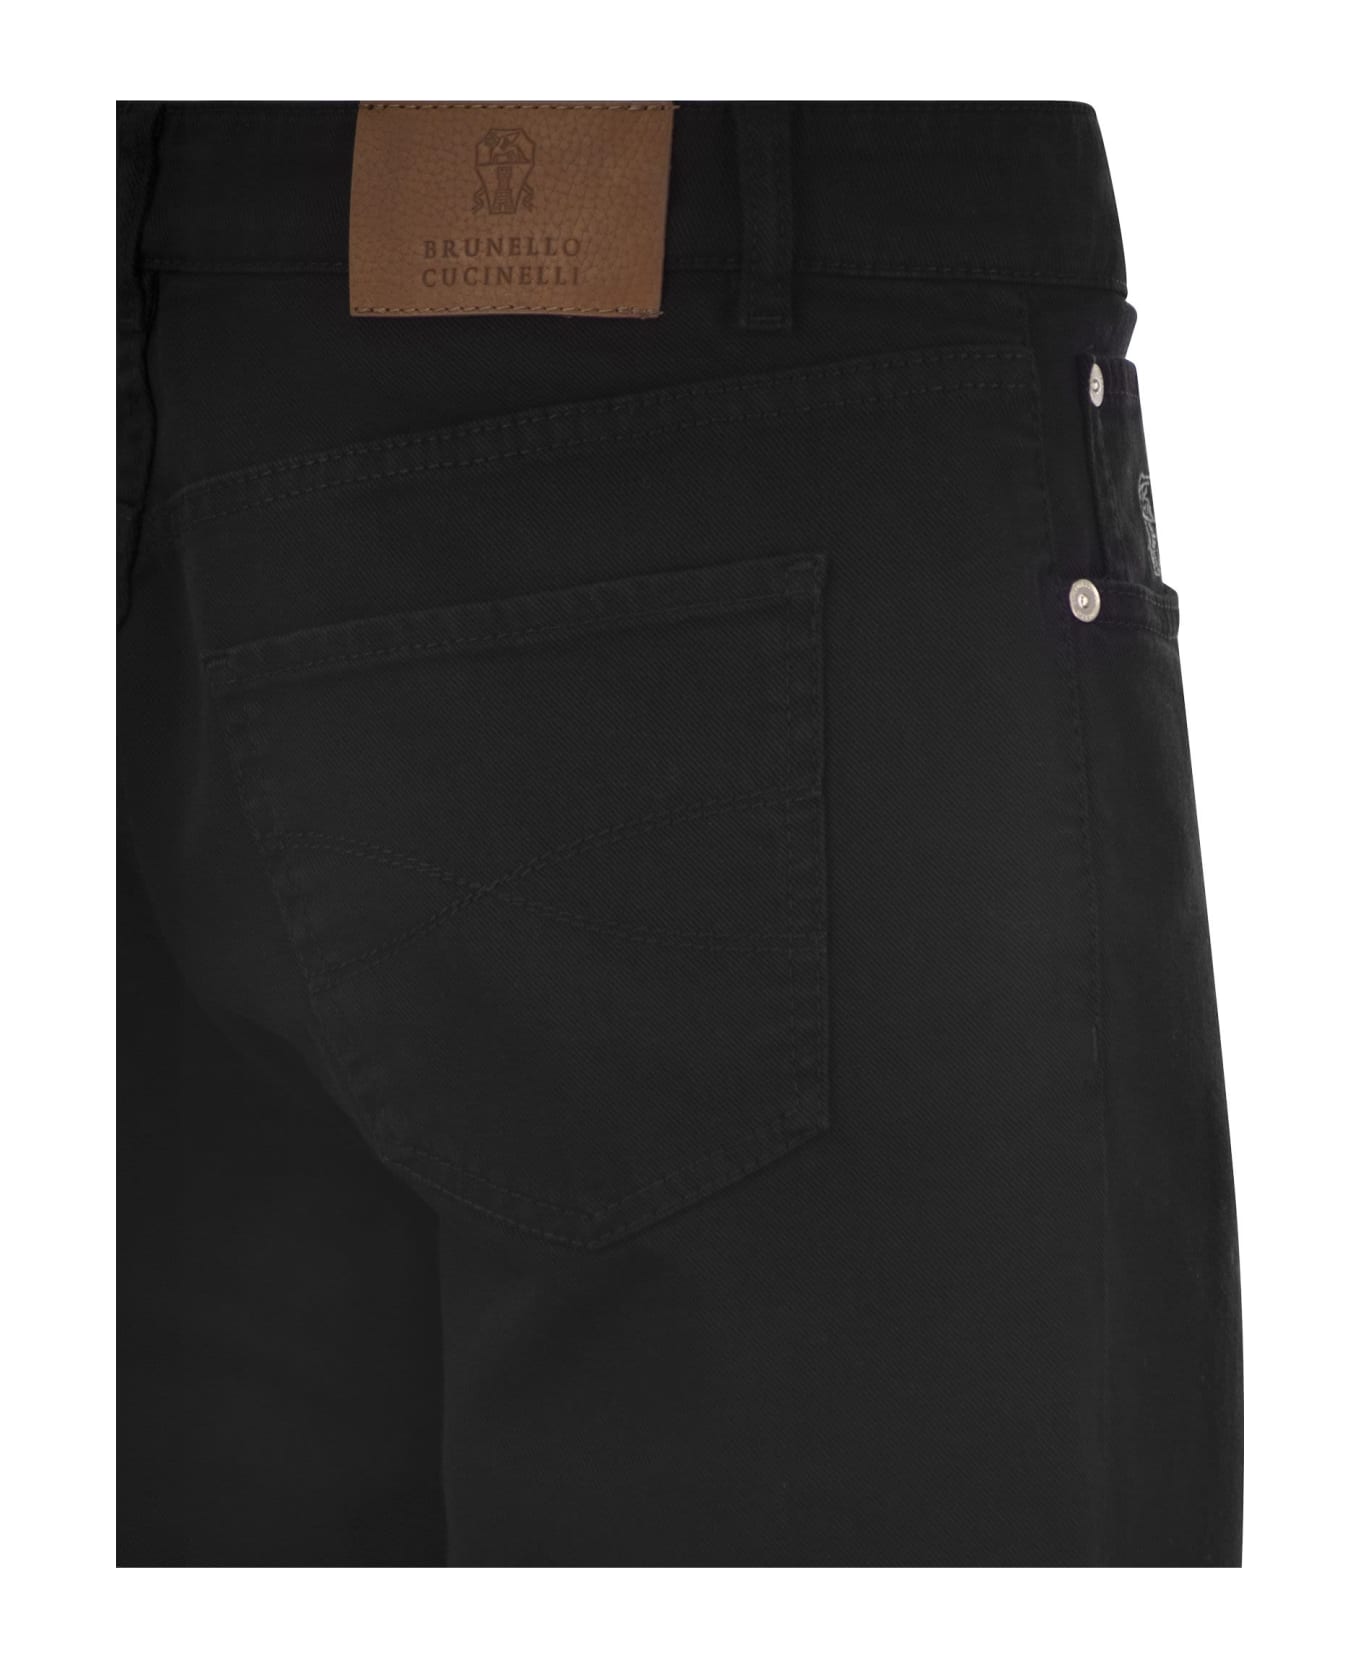 Brunello Cucinelli Five-pocket Traditional Fit Trousers - Black ボトムス